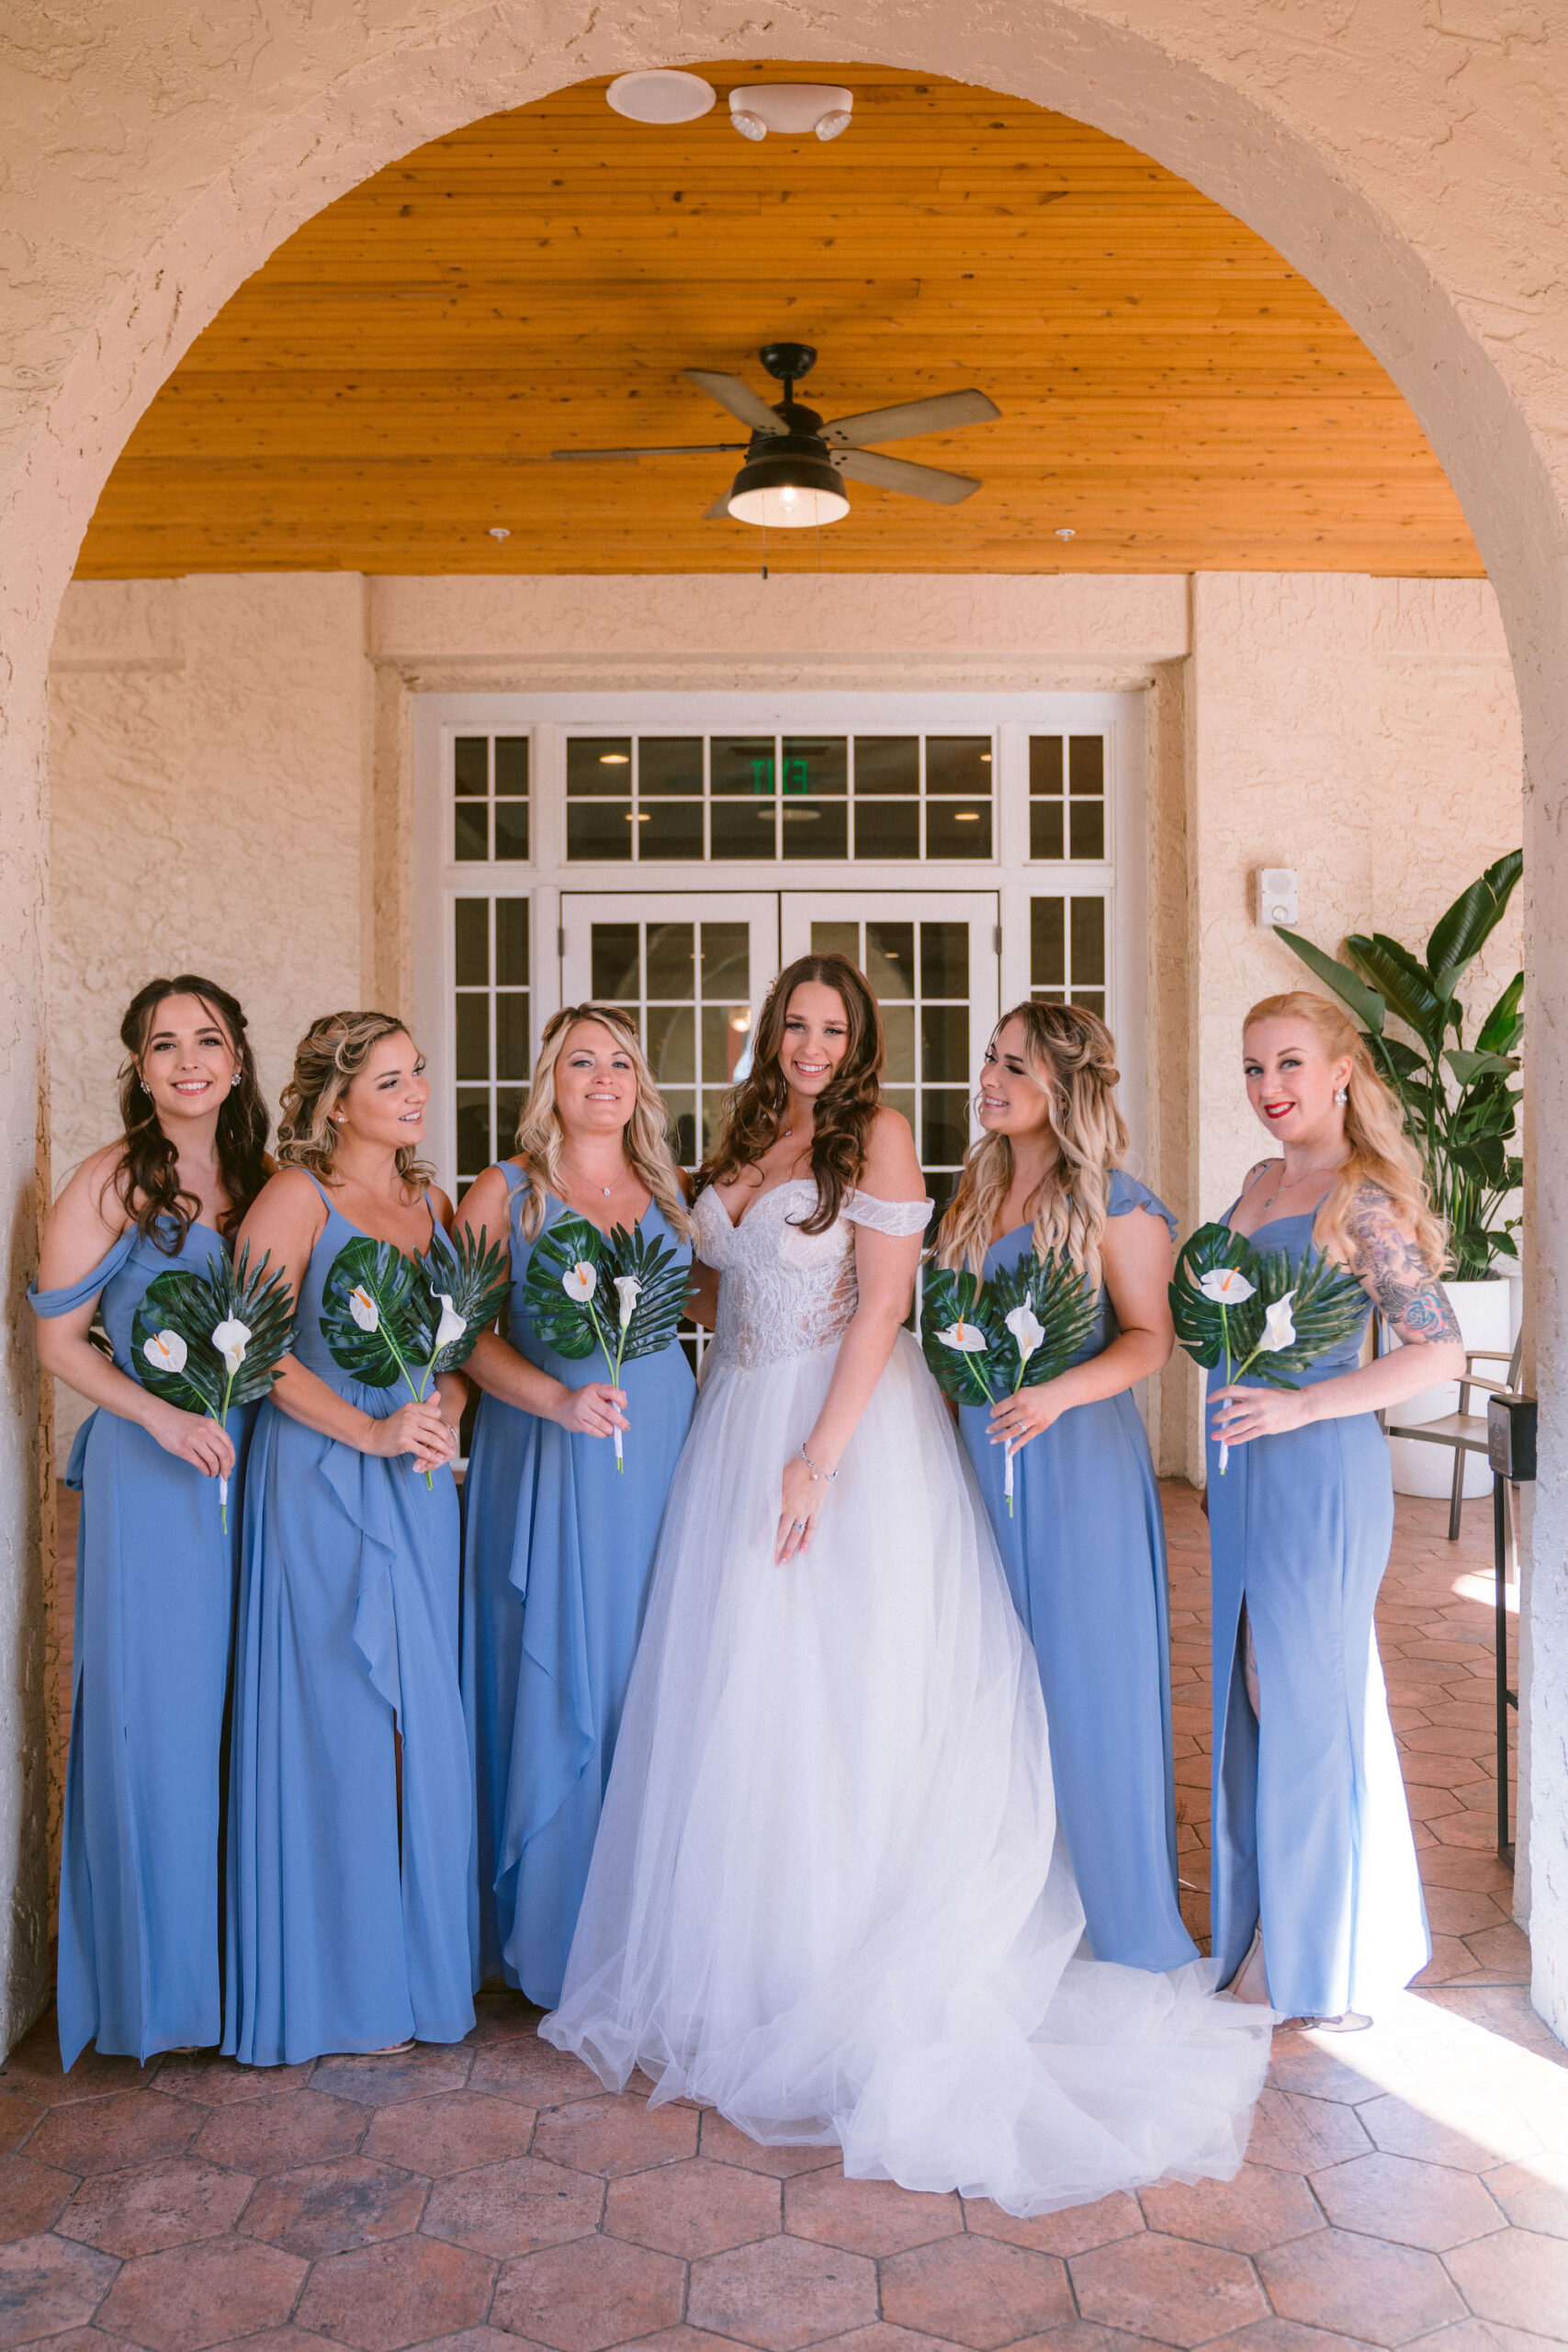 Bride with Bridesmaids in Dusty Blue Floor Length Dresses Wedding Portraits